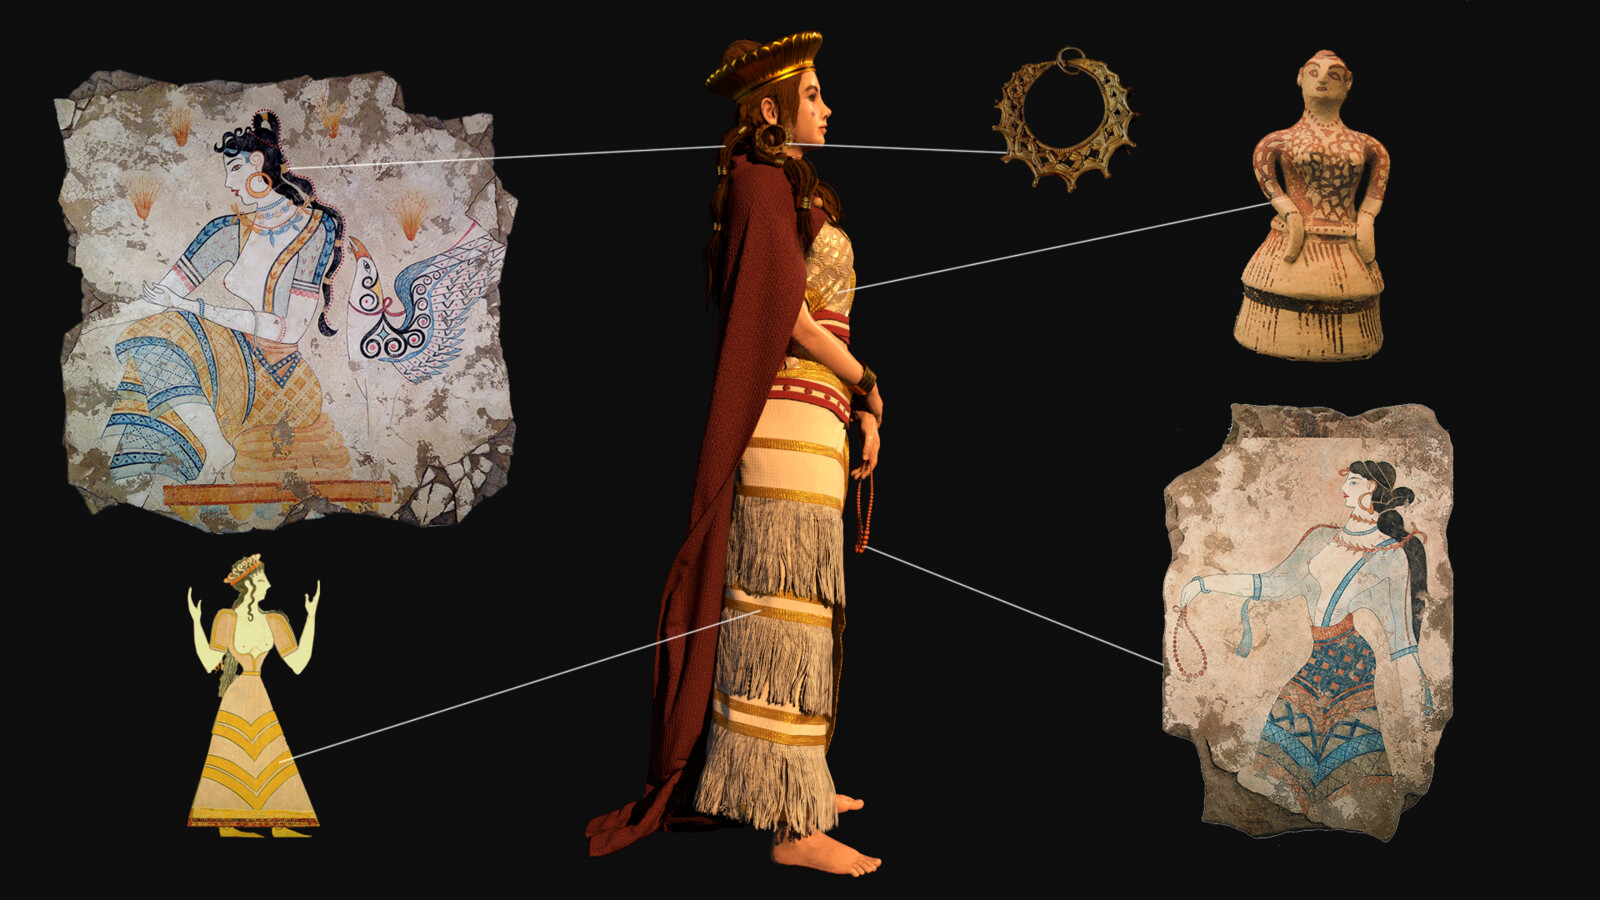 Research on clothing, hairstyle, patterns. The scale pattern of the dress appears a lot in Mycenaean and Minoan art. I used a Spartan figurine of a noblewoman, dating to approximately the same time as the setting of the Iliad.